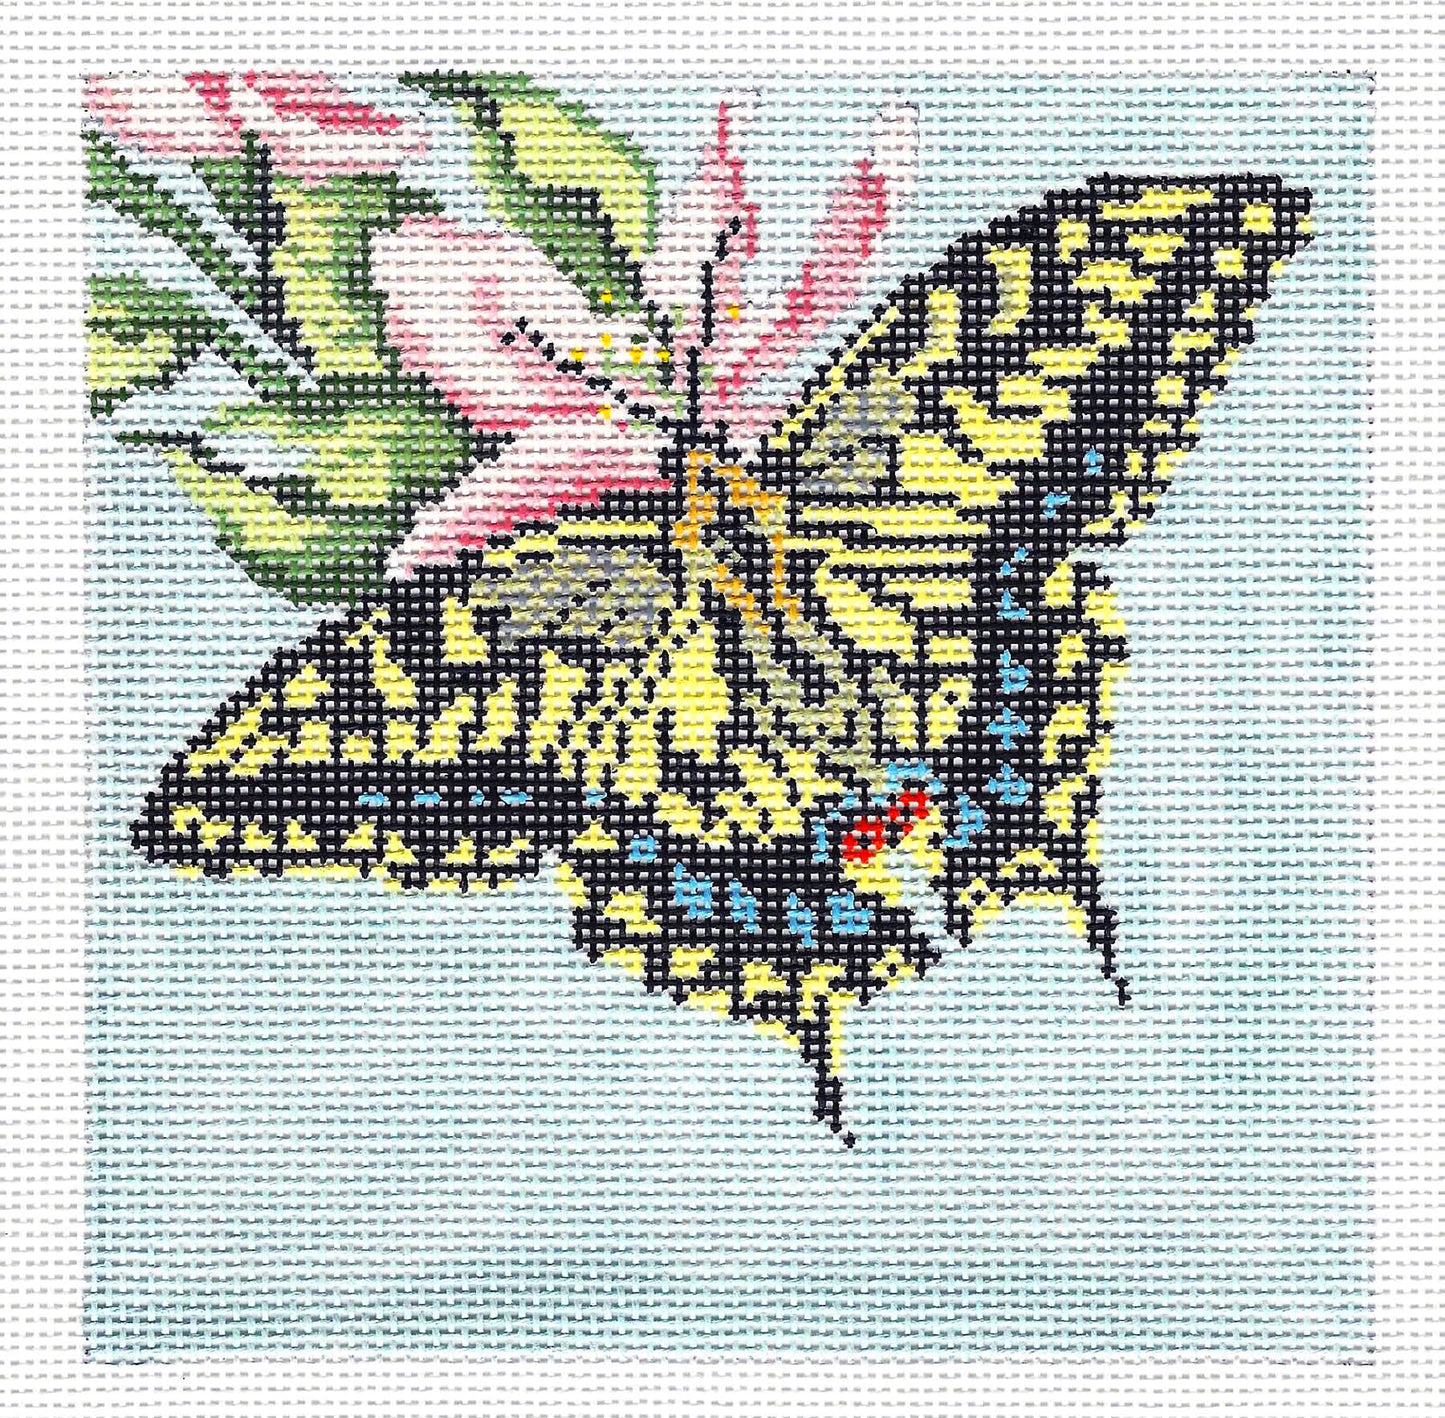 Butterfly Canvas ~ Swallowtail Butterfly 18 mesh handpainted 5" Sq. Needlepoint Canvas by Needle Crossings